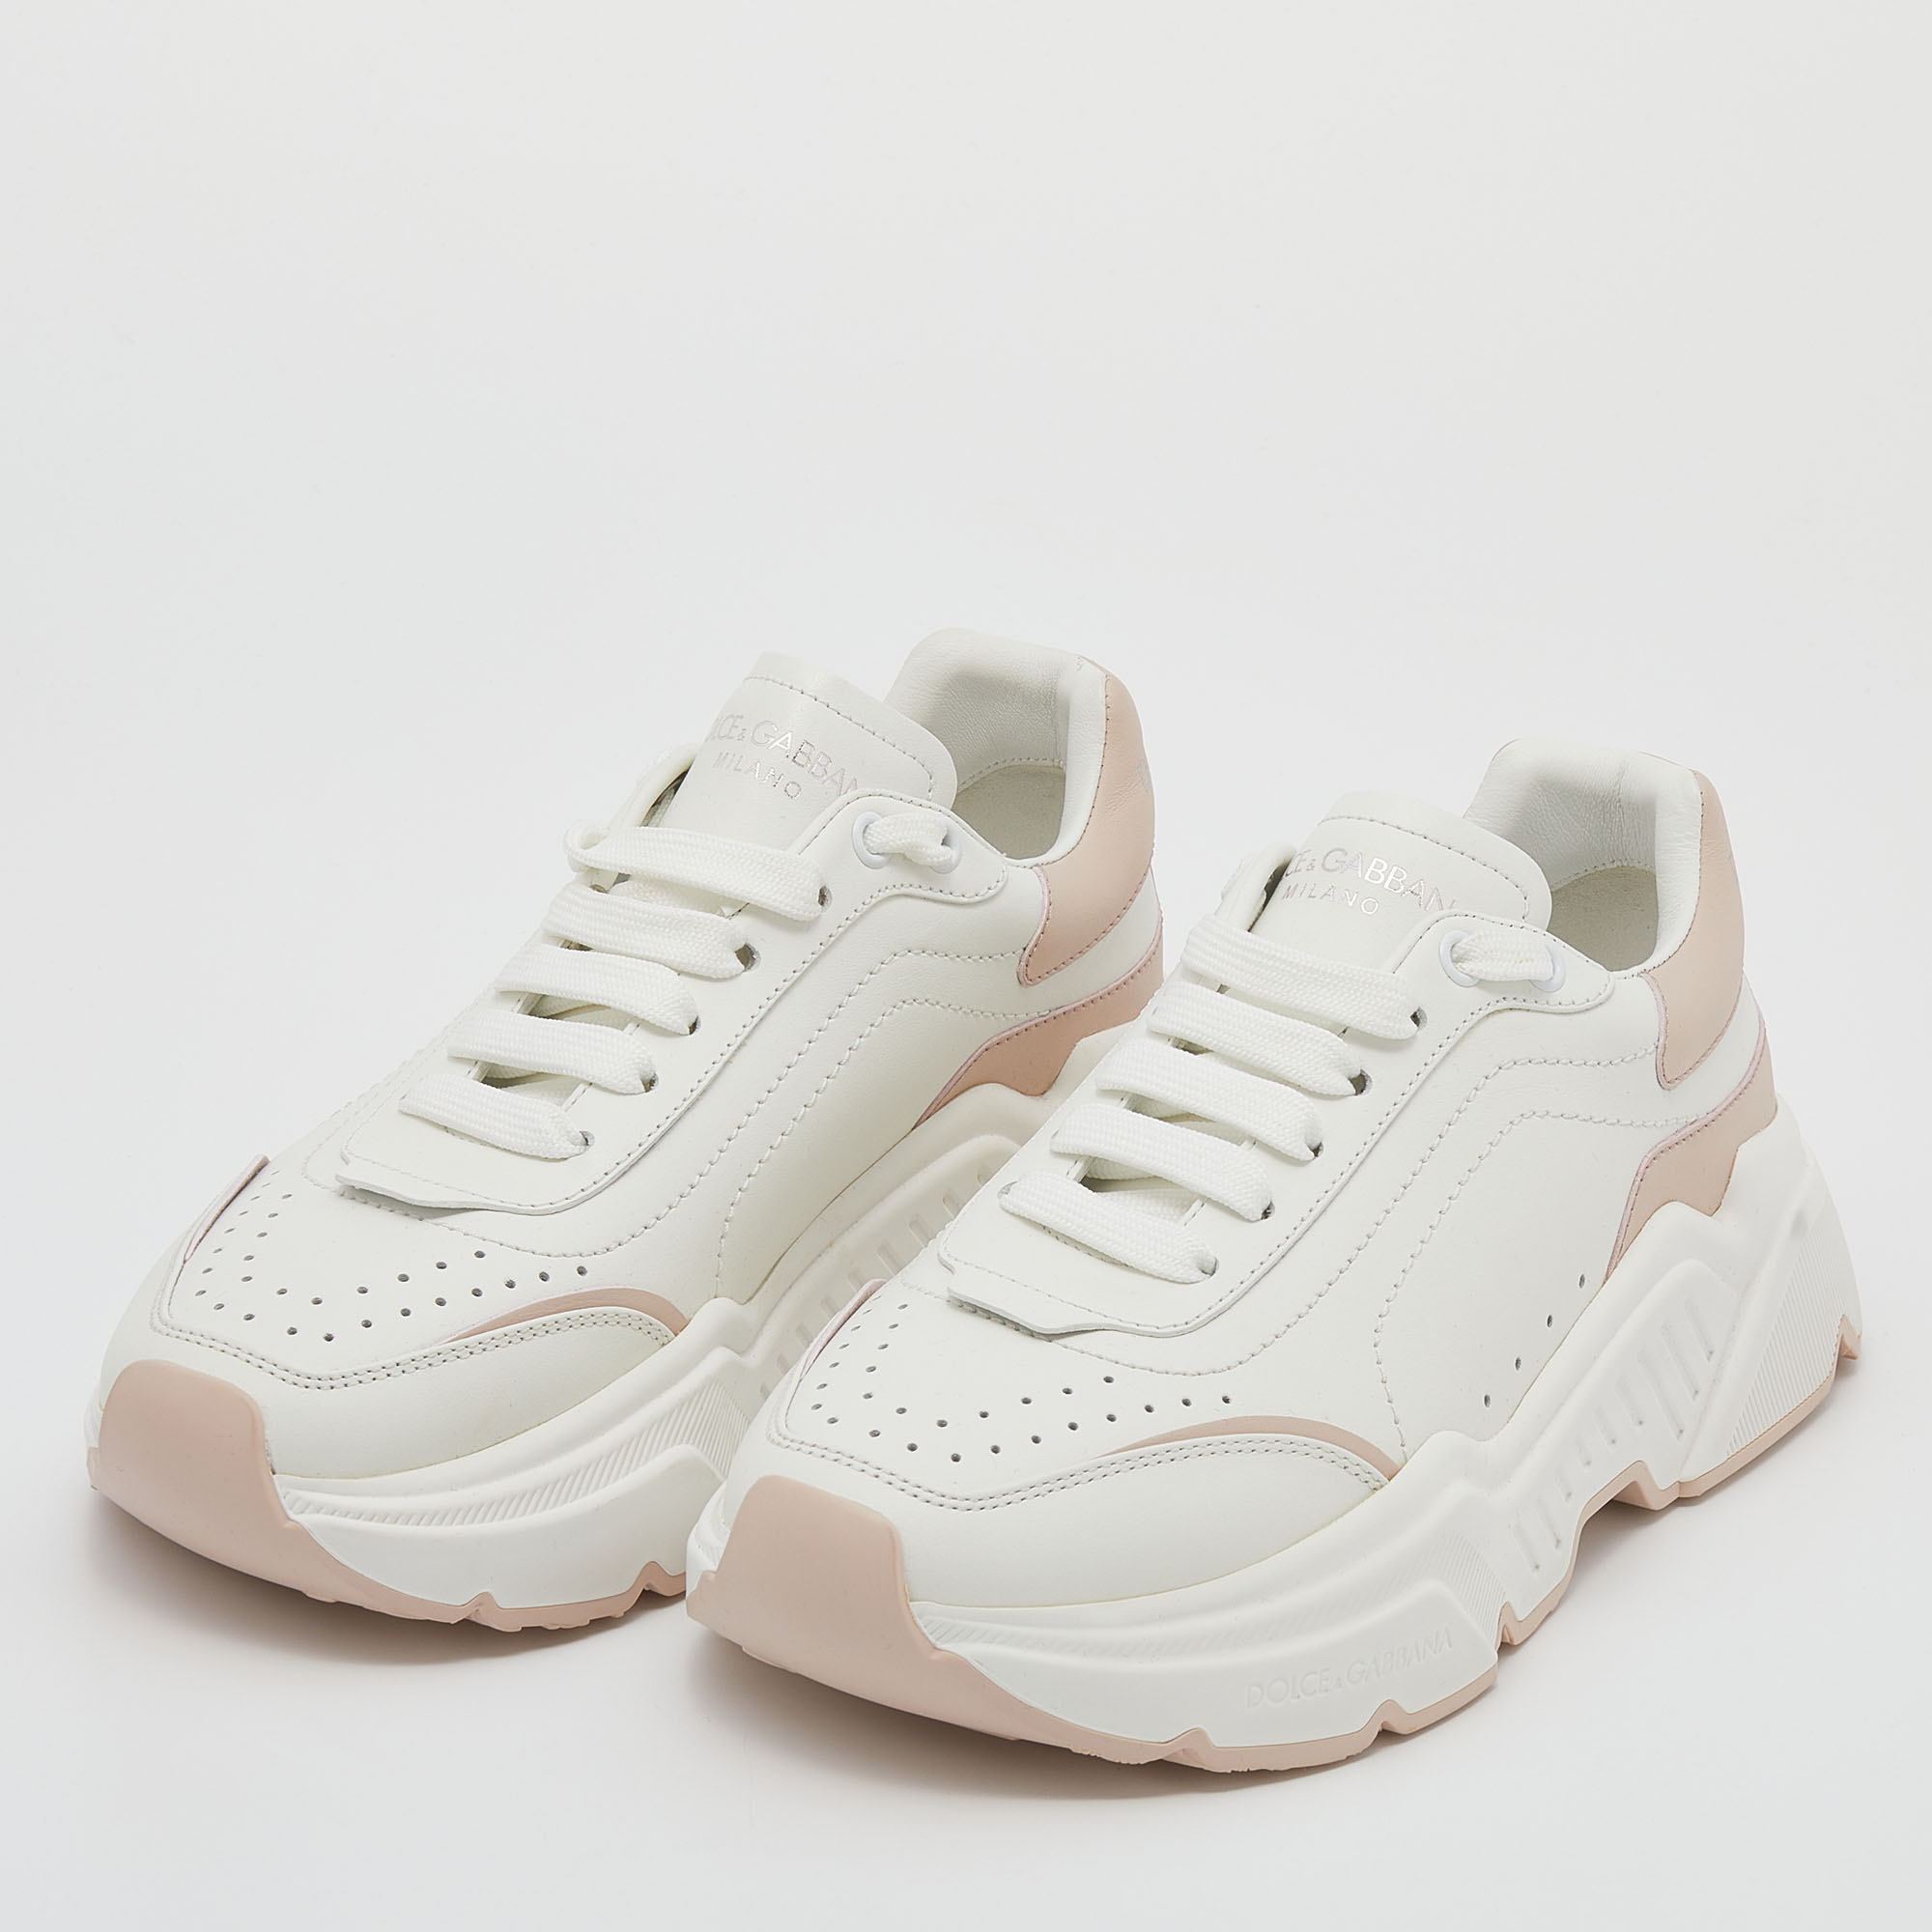 

Dolce & Gabbana White/Blush Pink Leather Daymaster Sneakers Size